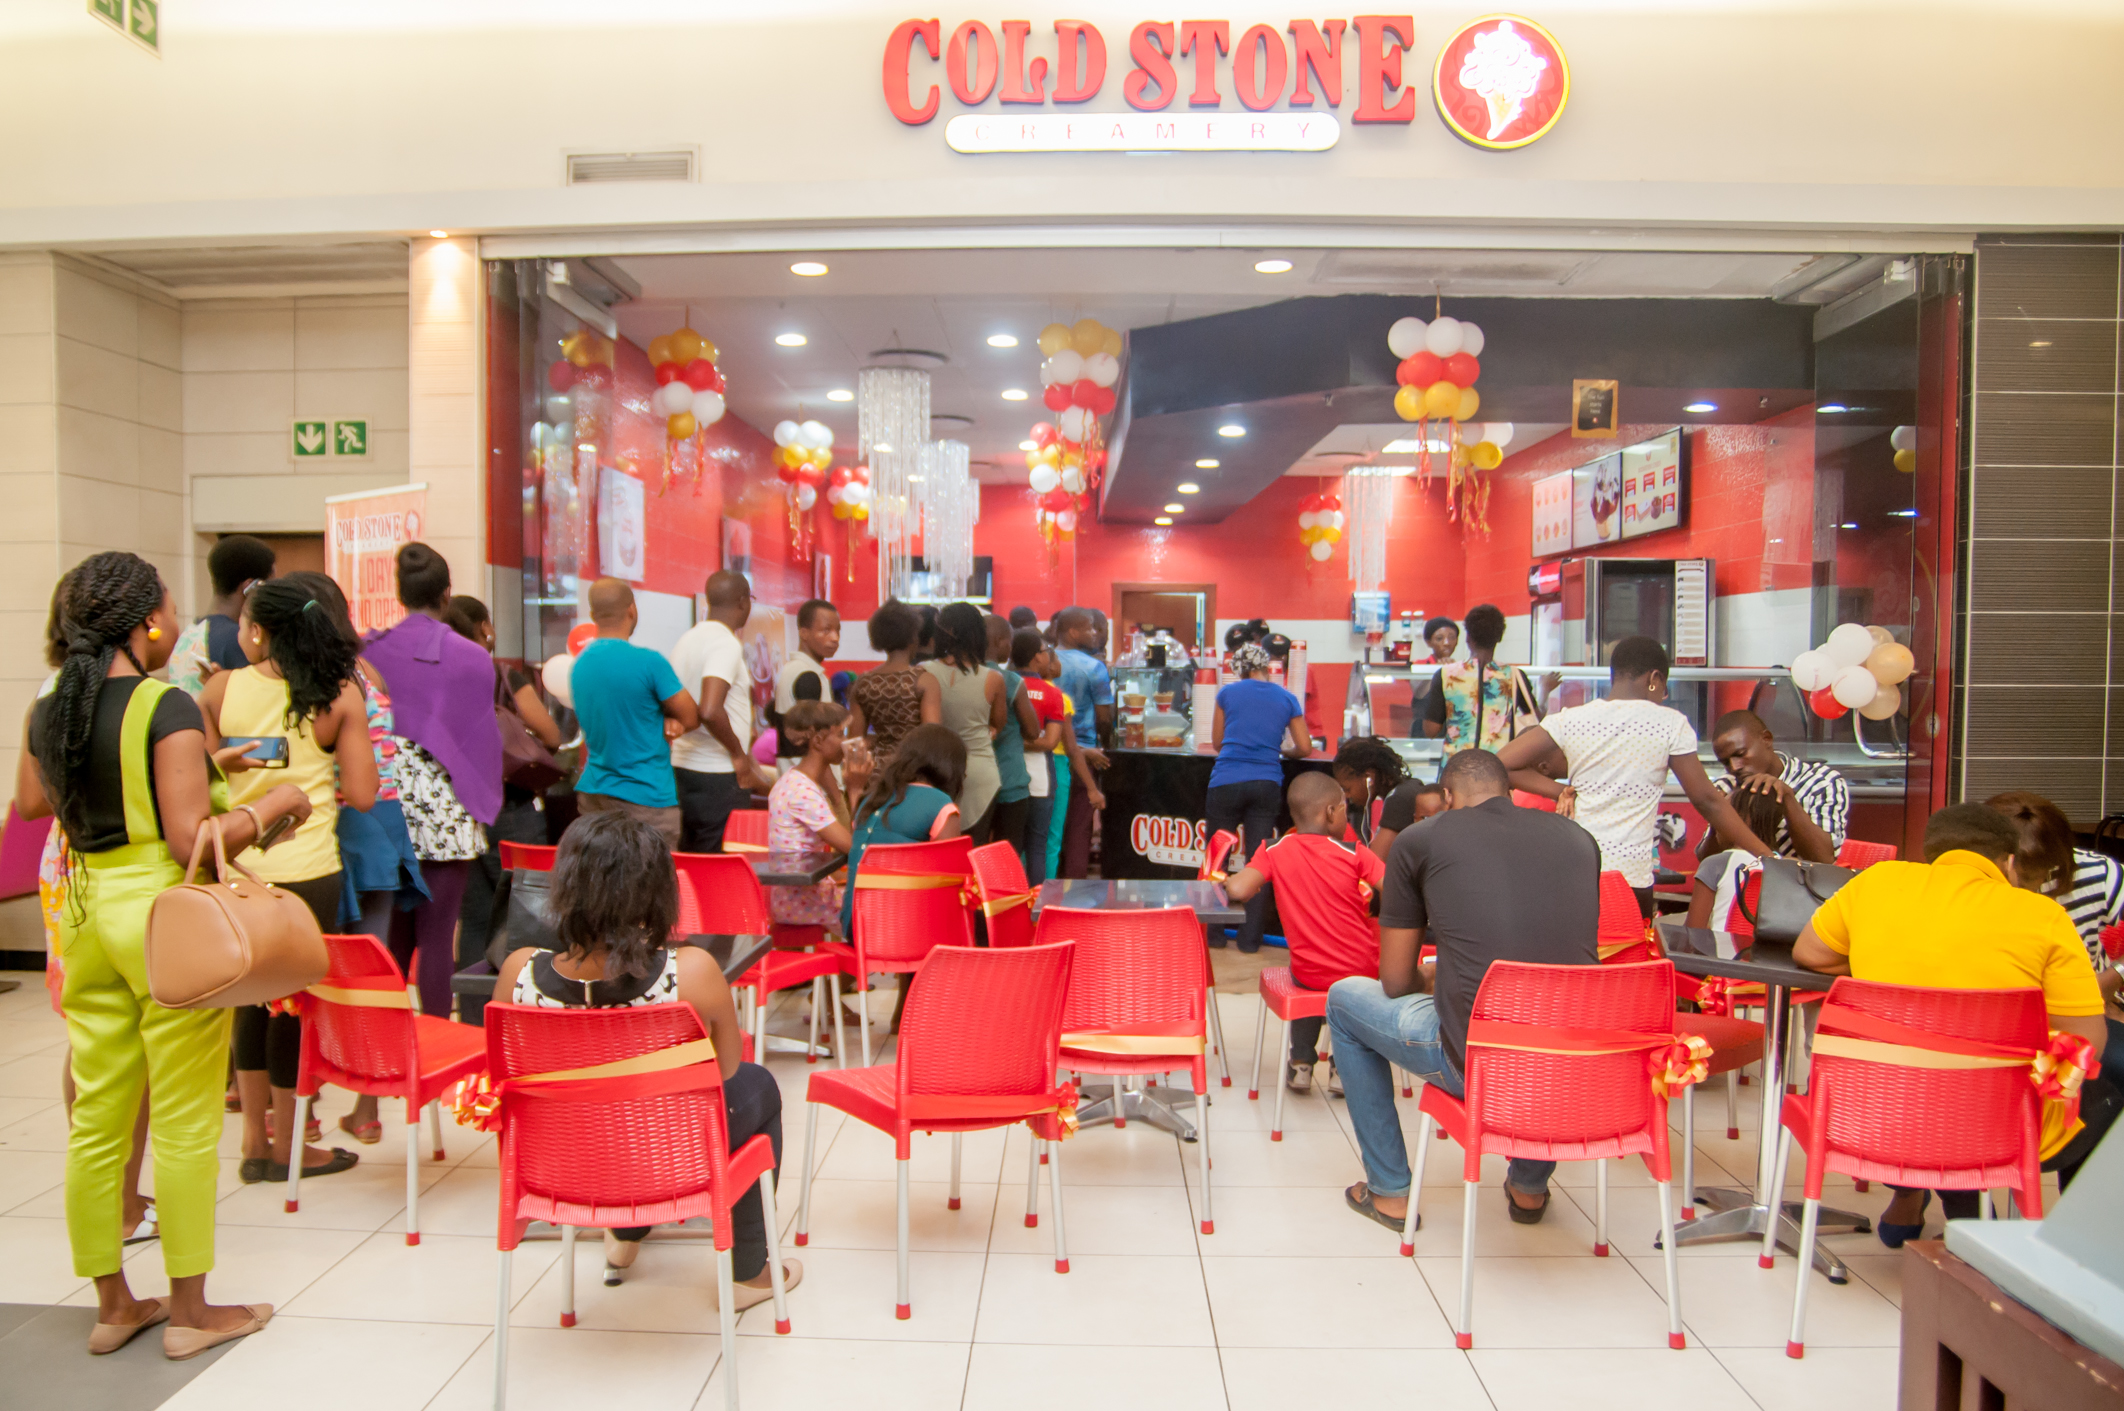 Customers waiting in line at Cold Stone Creamery in Ikeja, Nigeria.